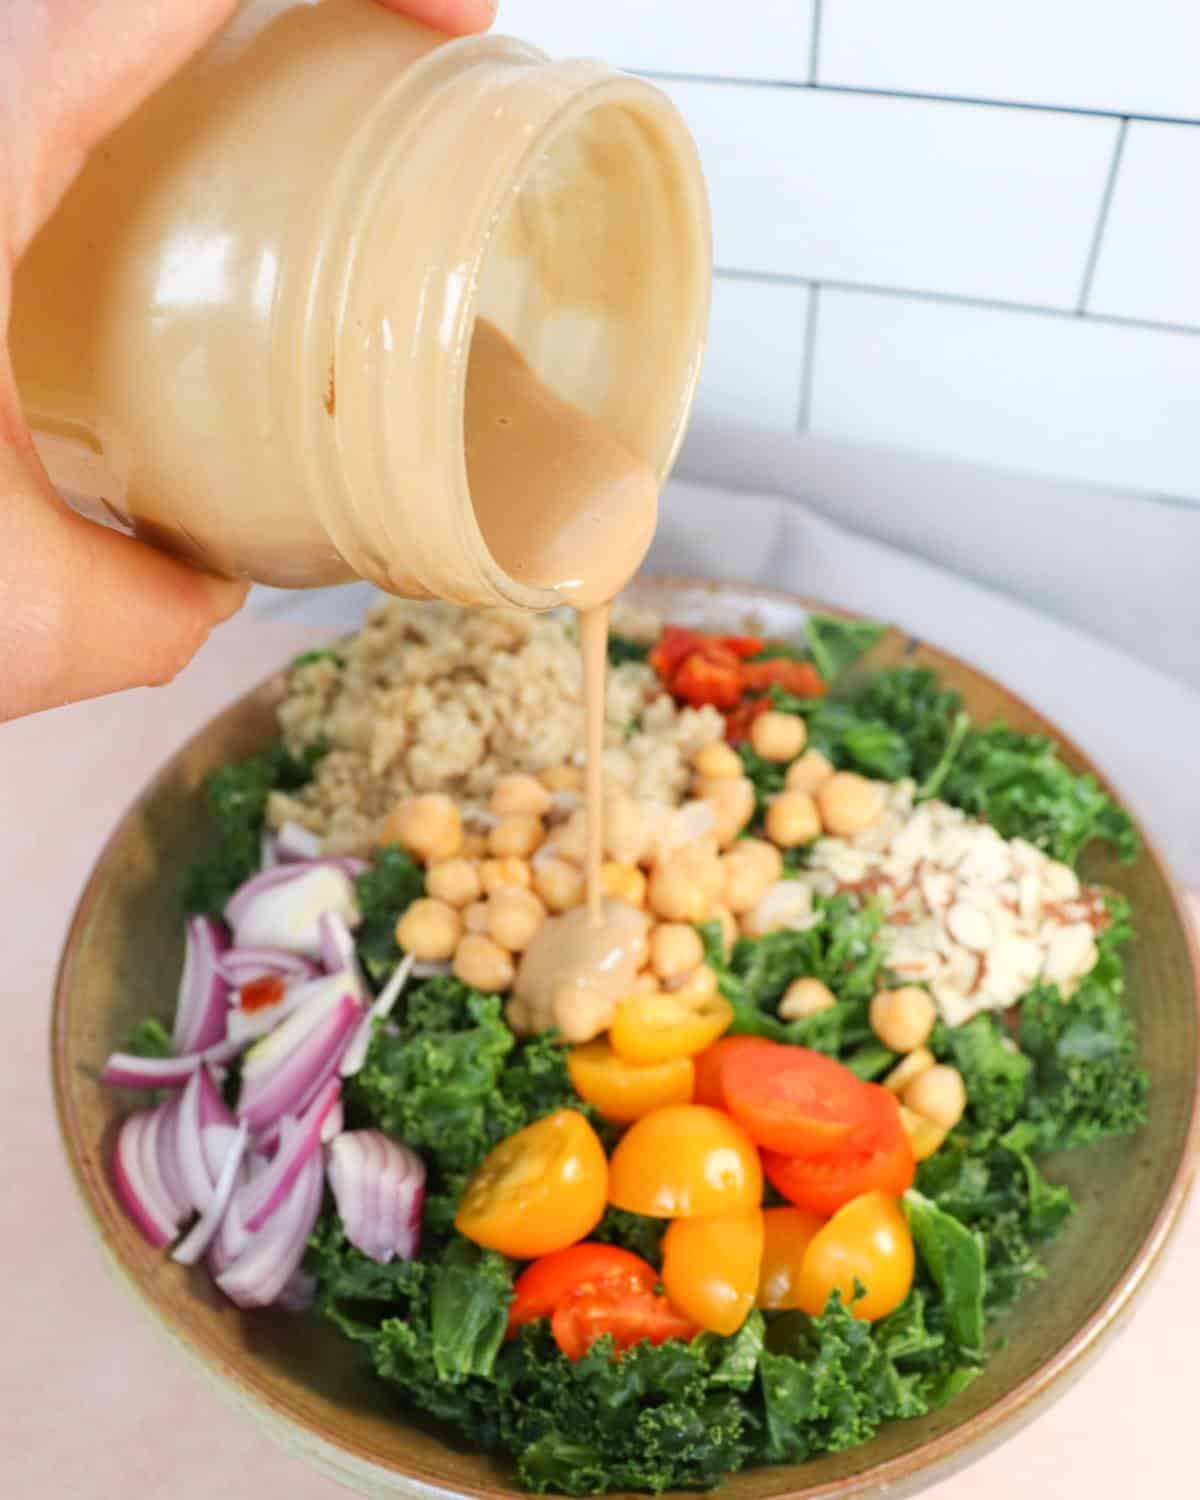 Tahini dressing getting poured over a kale salad.